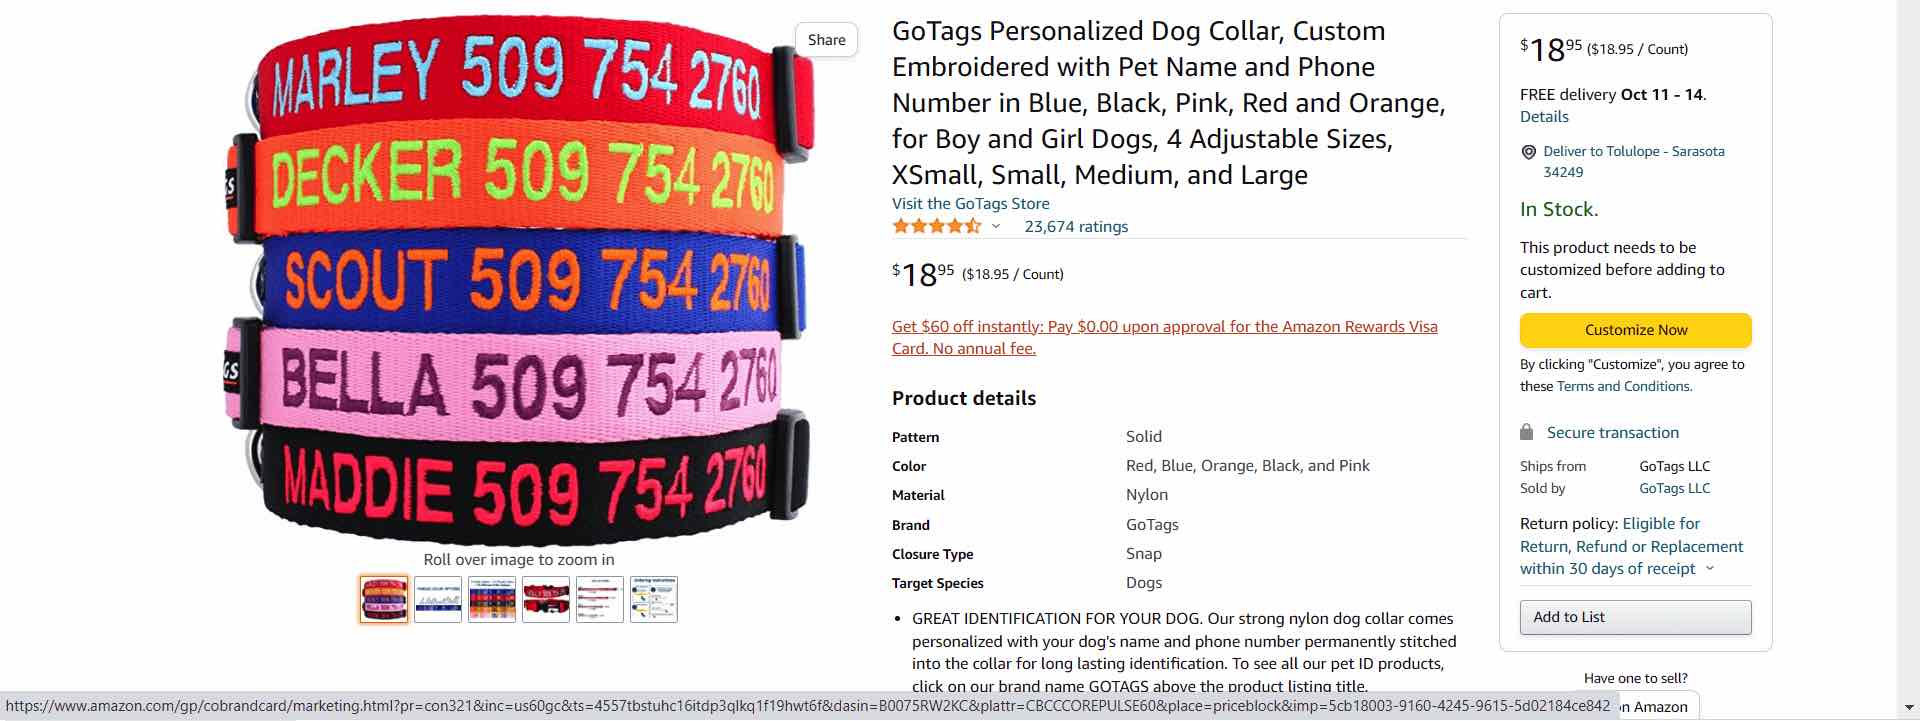 best ecommerce niches, Amazon niche store selling embroidered dog collars